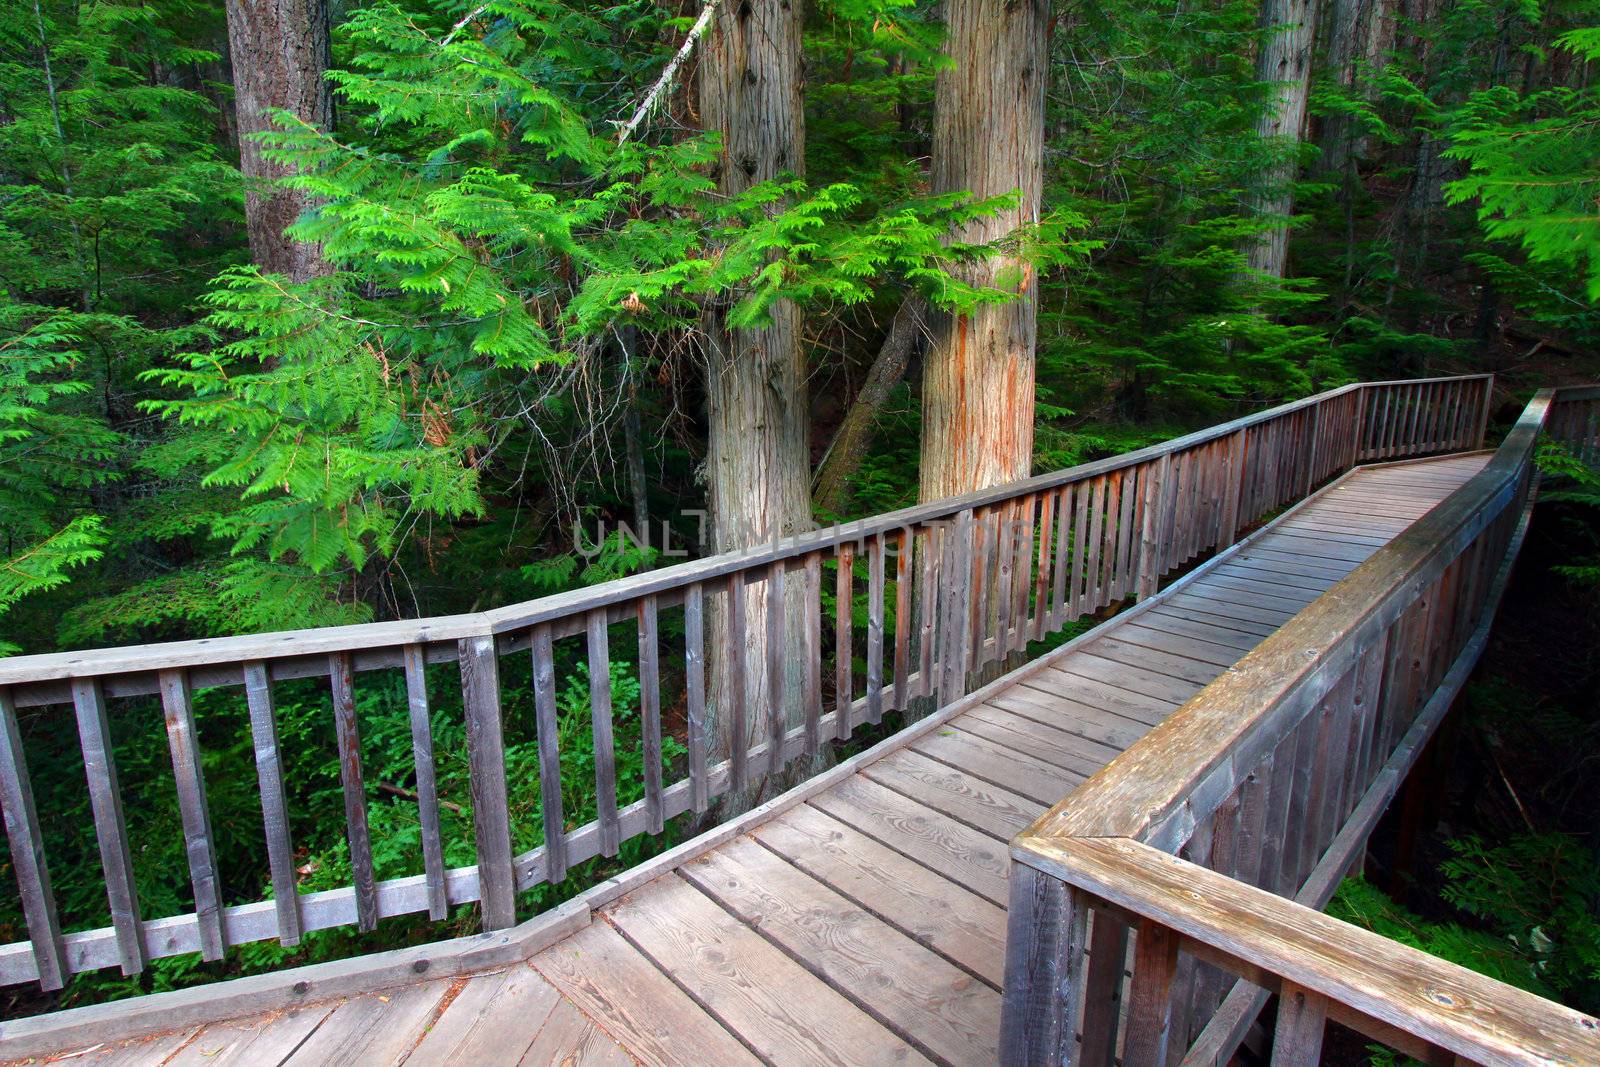 Boardwalk passing by ancient trees on the Trail of the Cedars in Glacier National Park - Montana.